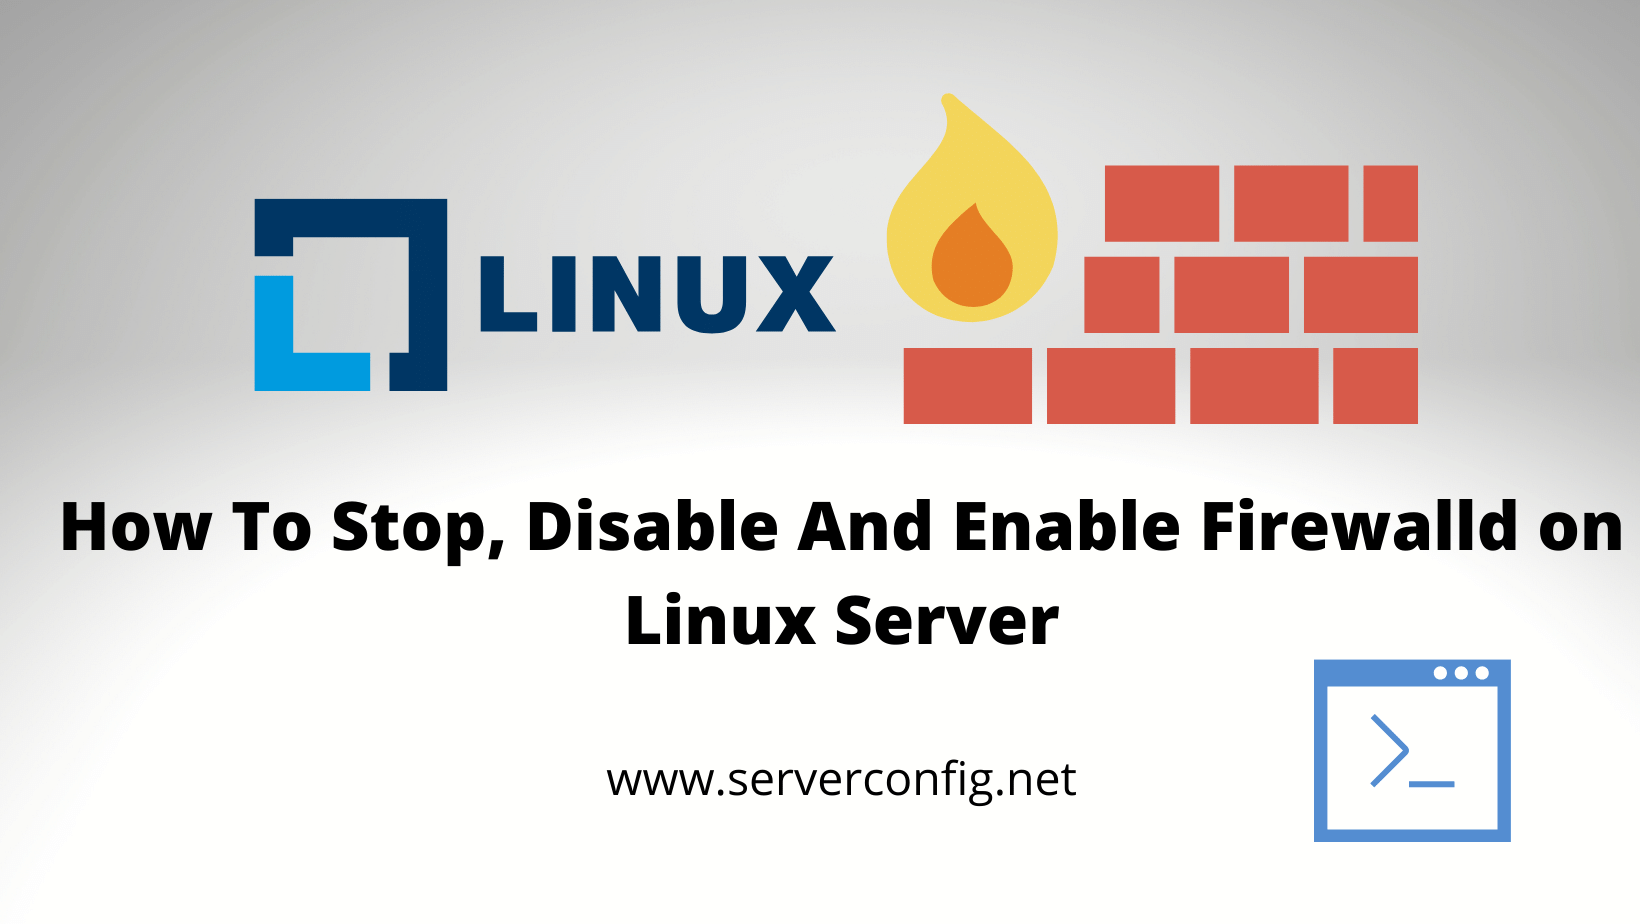 How To Stop, Disable And Enable Firewalld on Linux Server